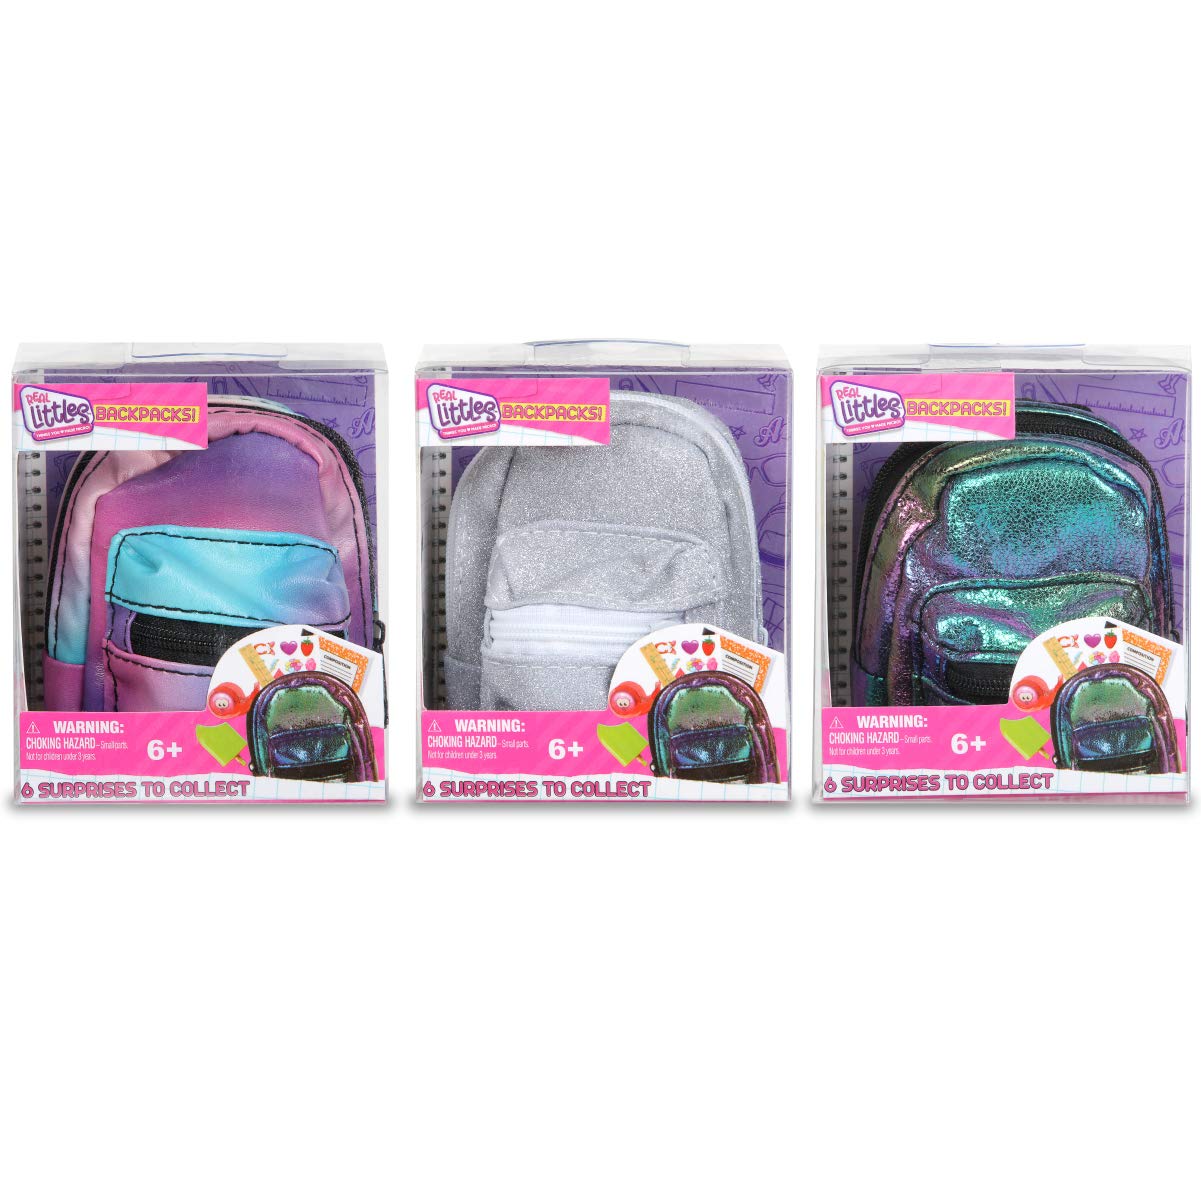 REAL LITTLES - Micro Backpack - 3 Pack with 18 Stationary Surprises Inside! - Styles May Vary